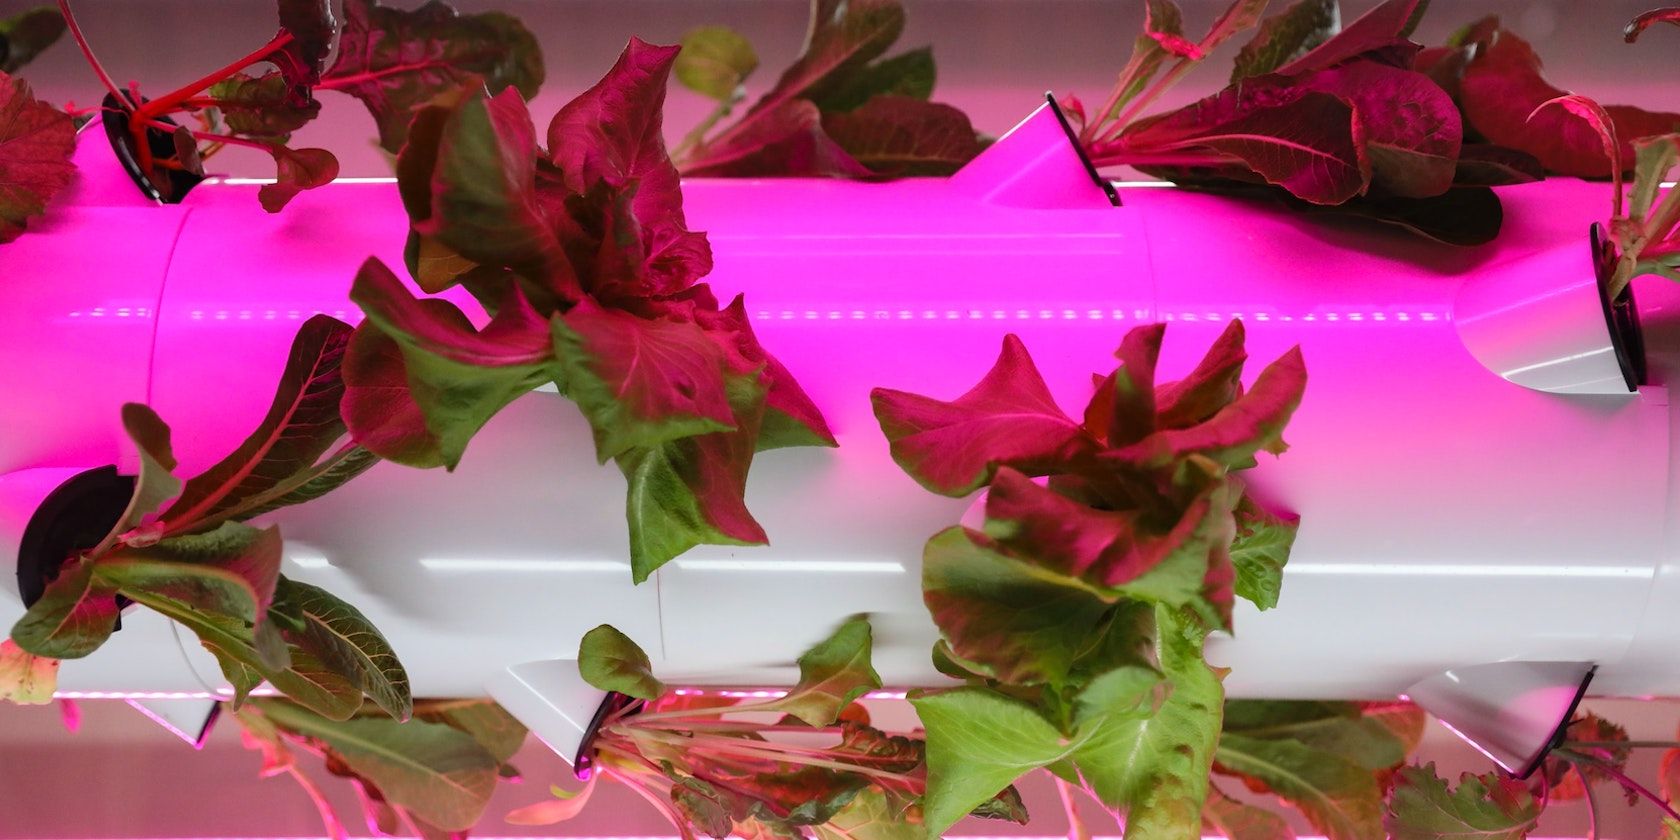 5 Hydroponic Systems With Raspberry Pi and Arduino